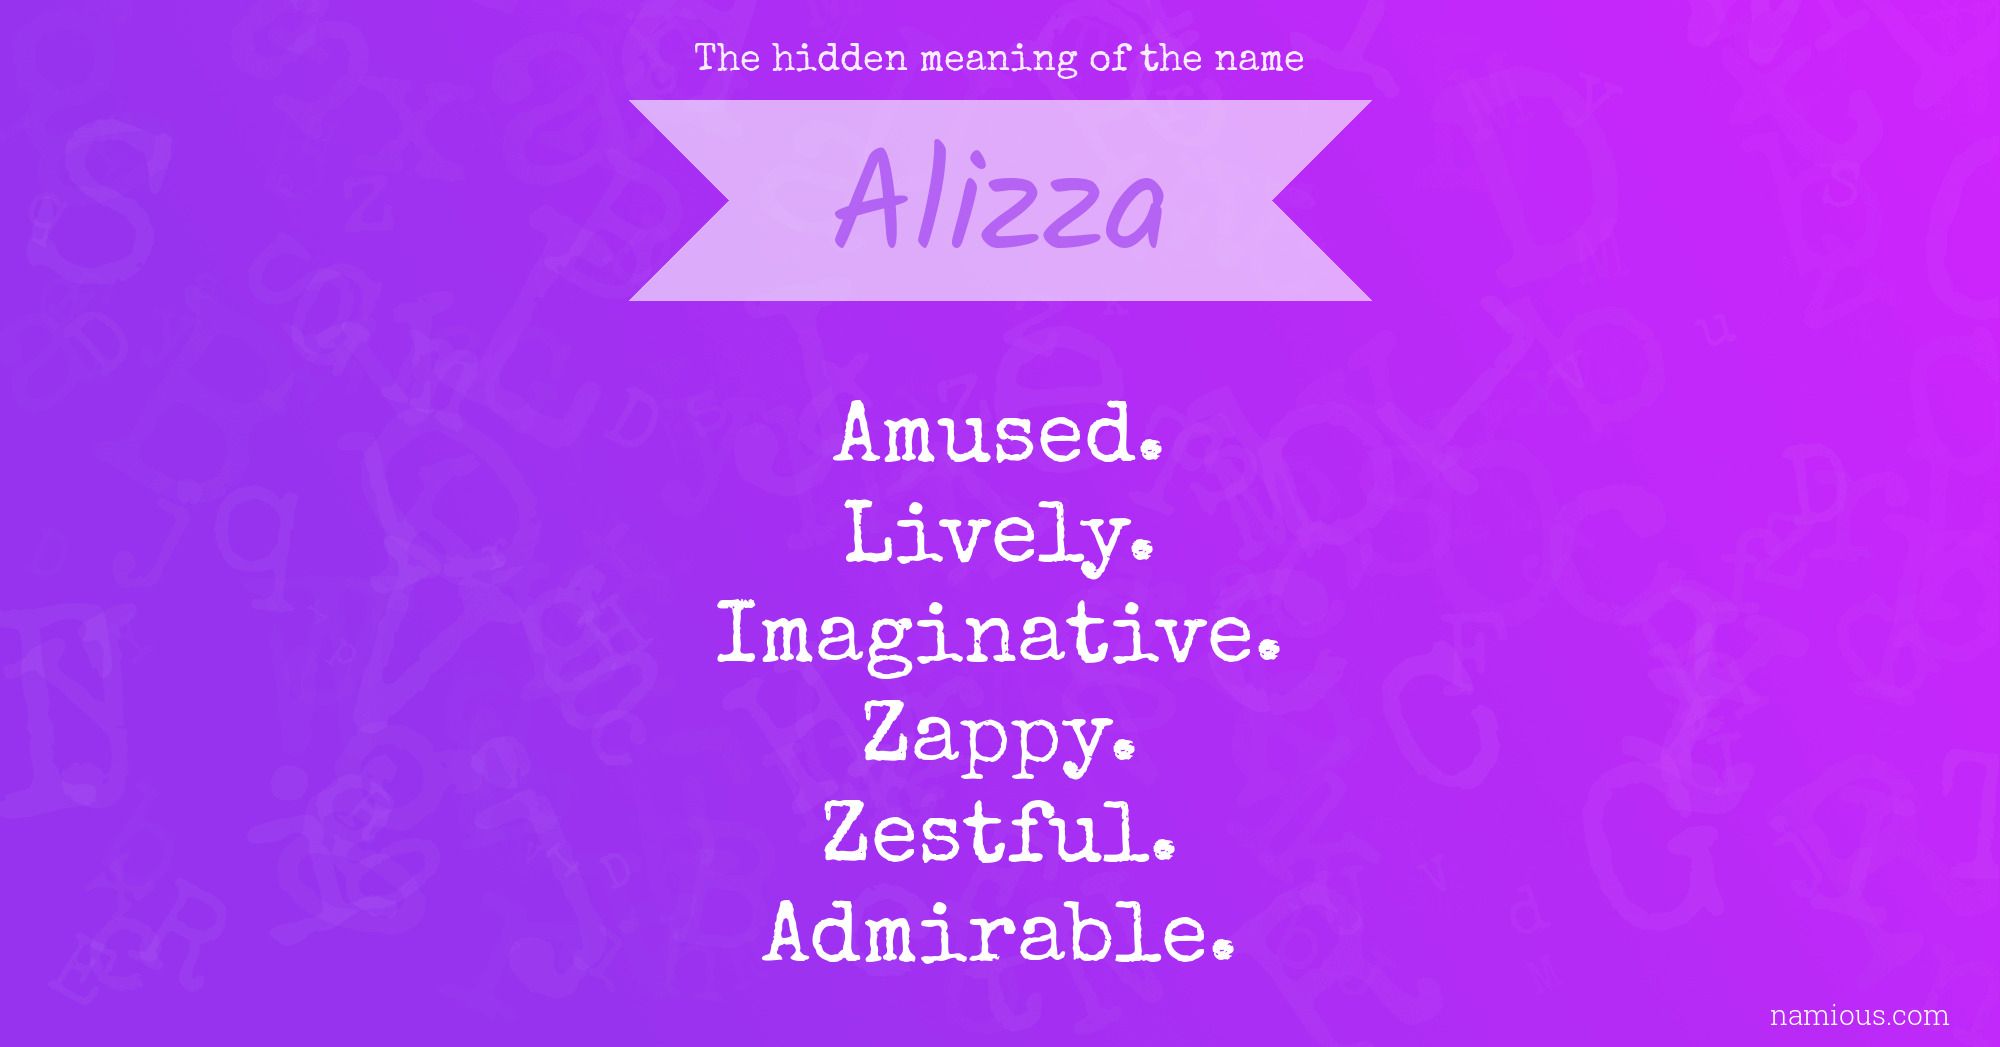 The hidden meaning of the name Alizza